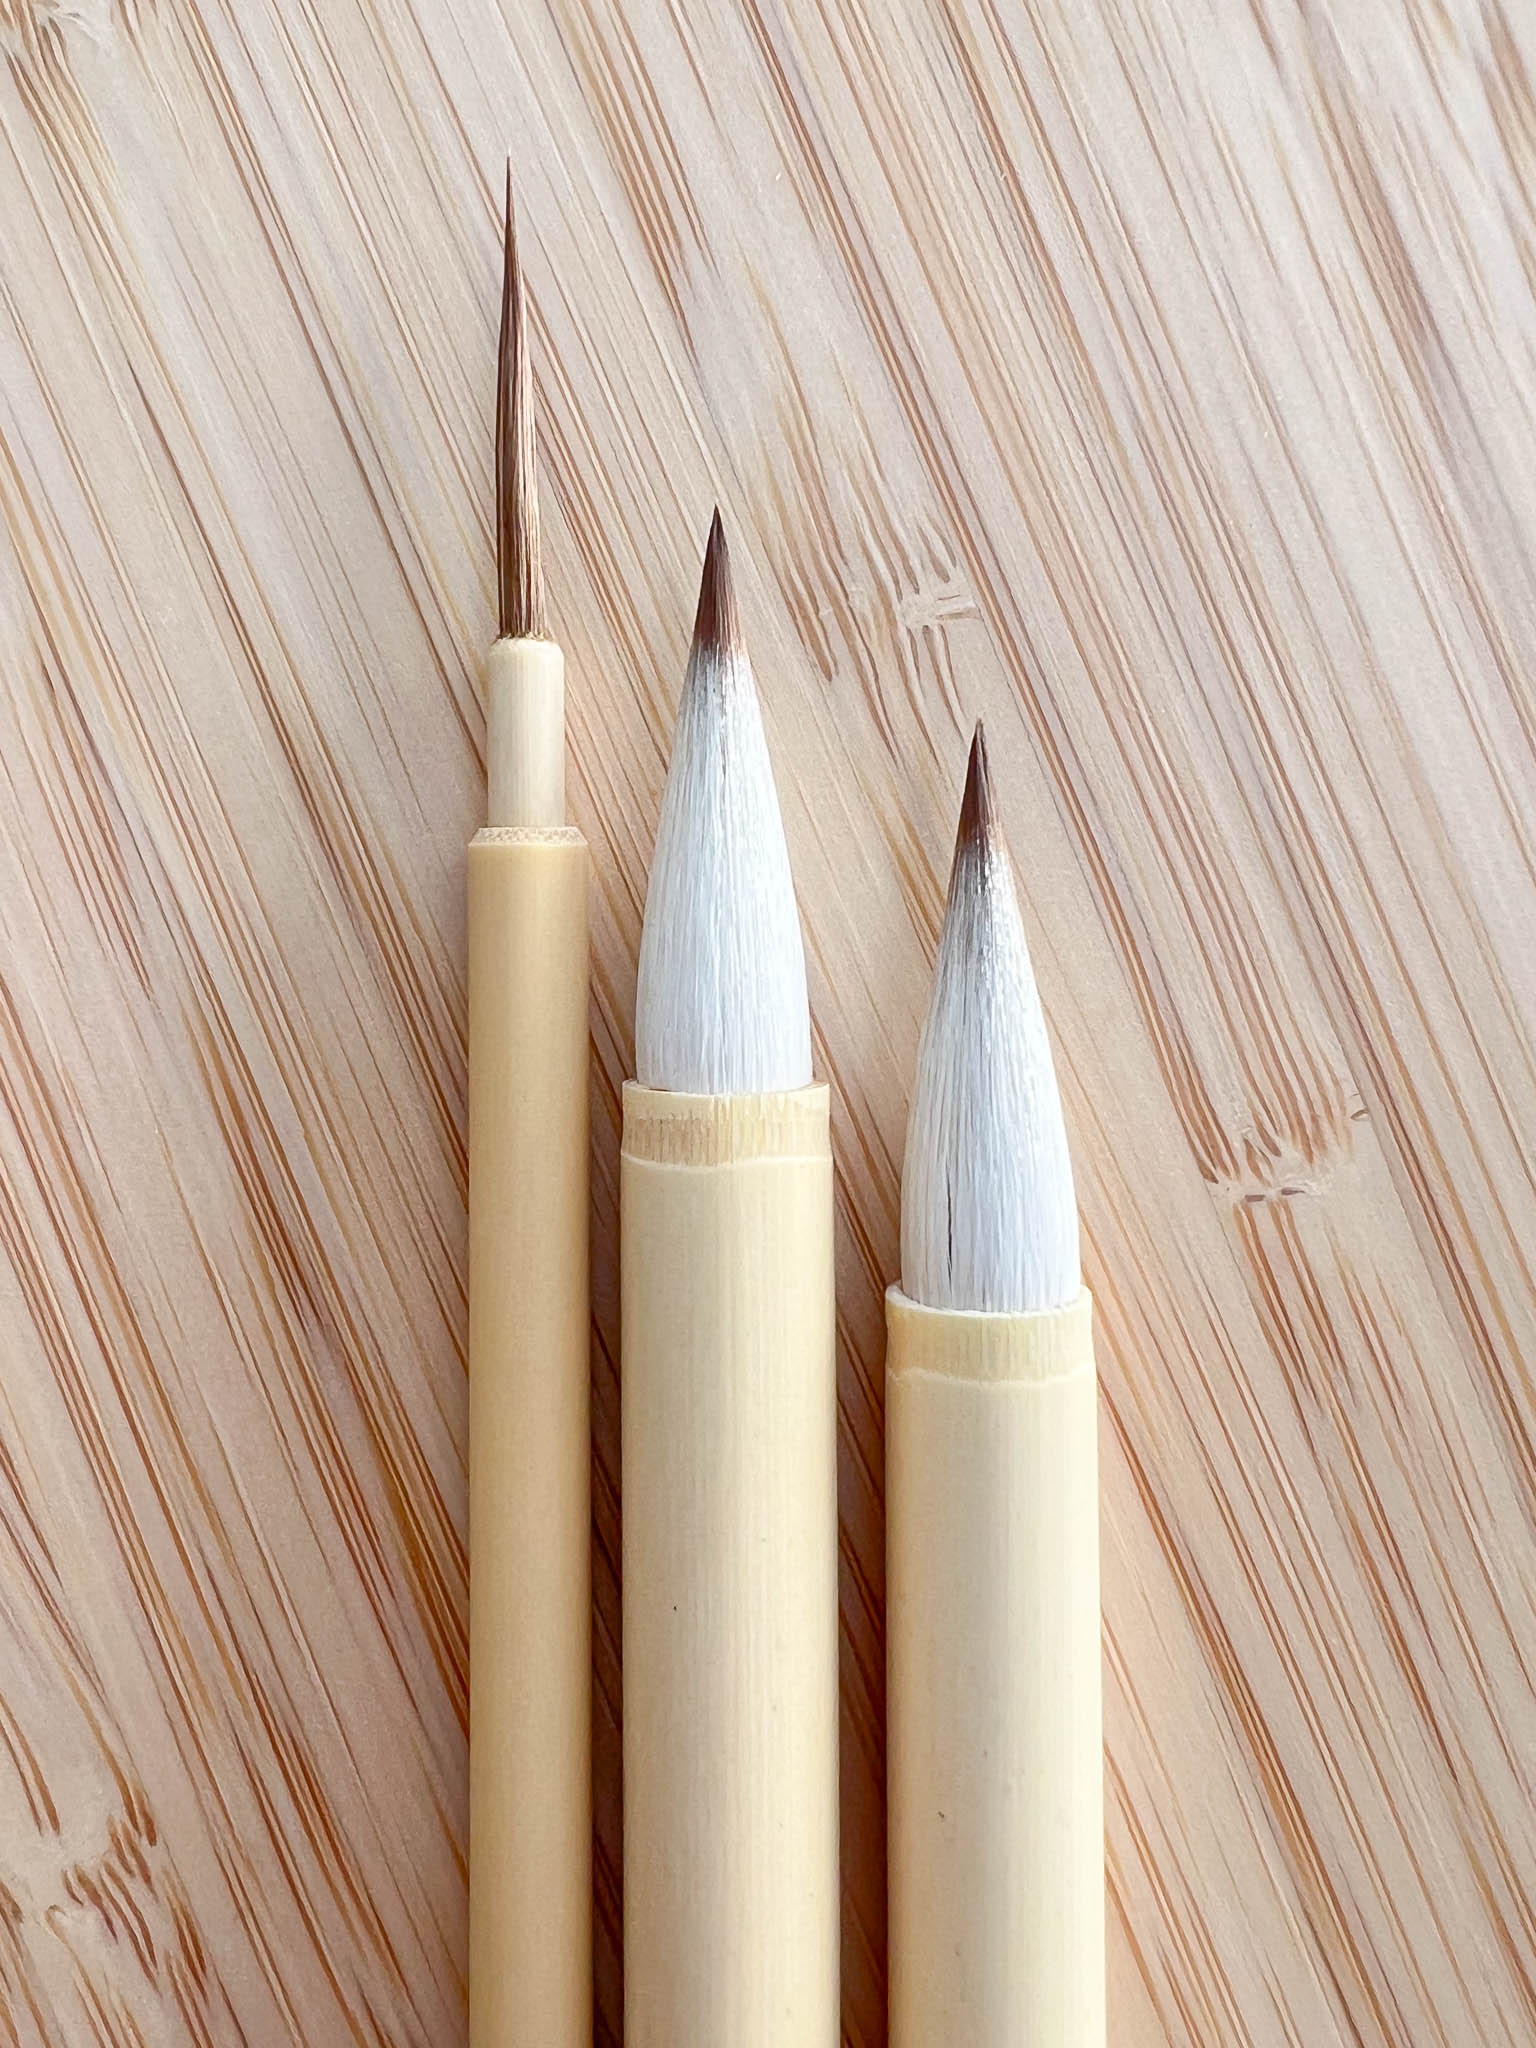 Chinese paint brushes showing the animal hair brush tip goat deer and weasel